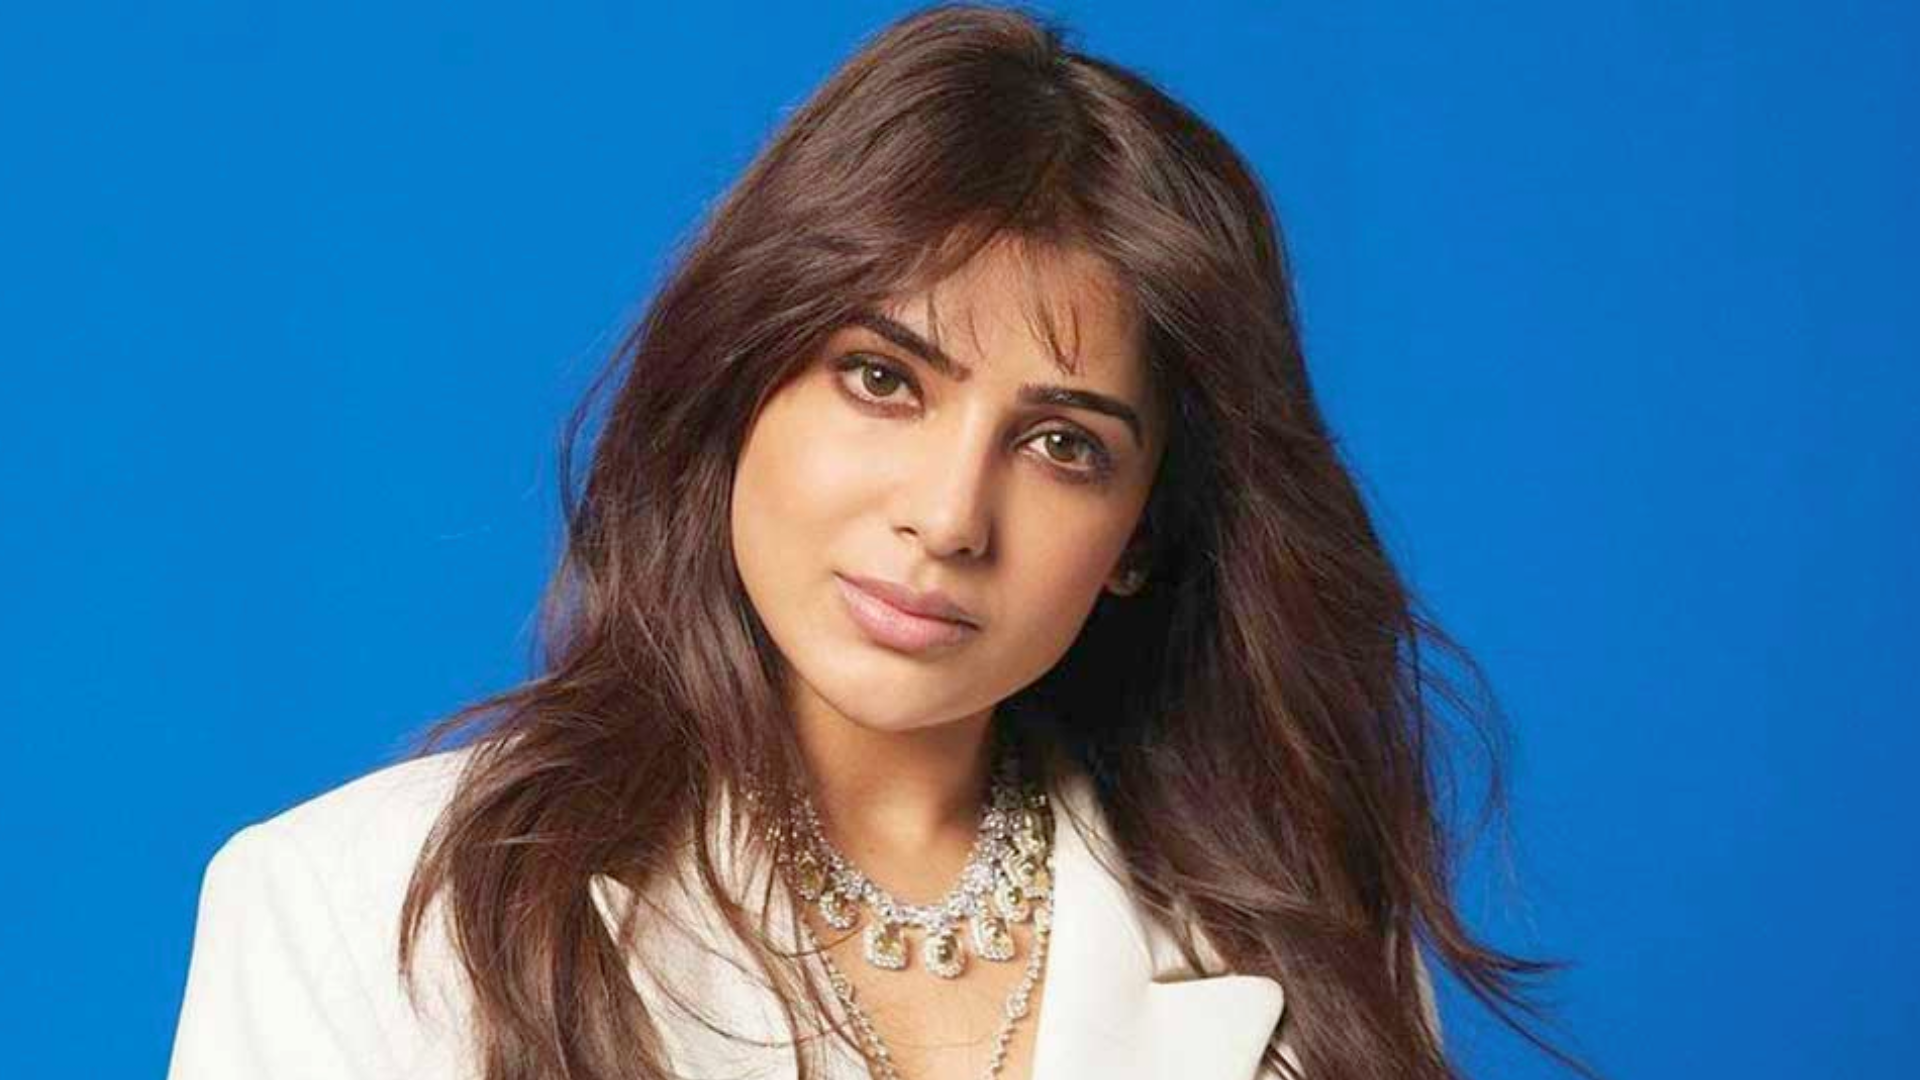 Samantha Ruth Prabhu Gets Accused Of Playing ‘Victim Card’ After Getting Dubbed ‘Health & Science Illiterate’